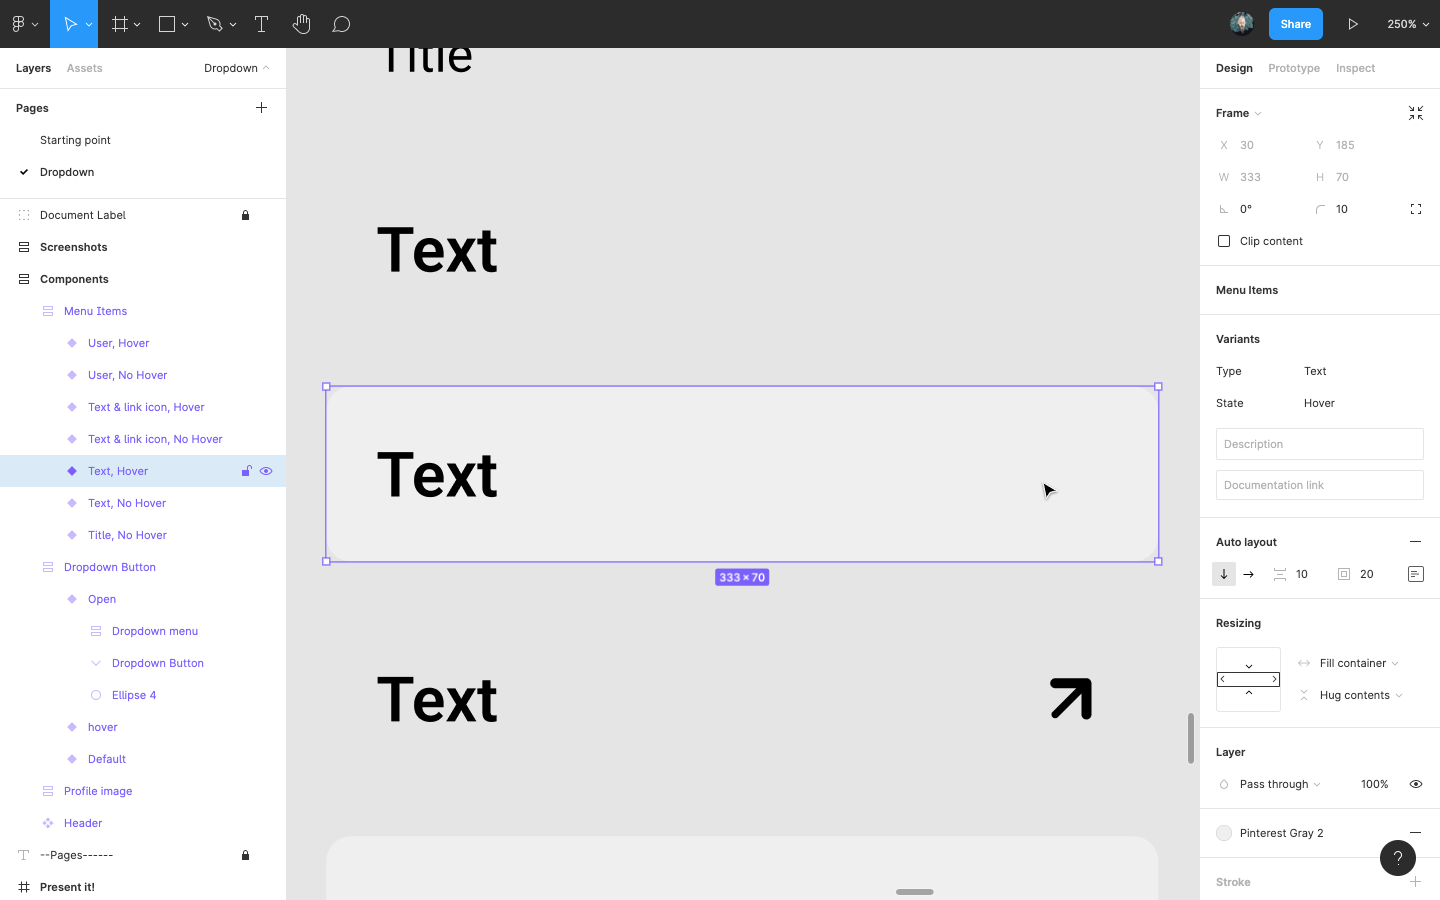 Add a text, hover variant